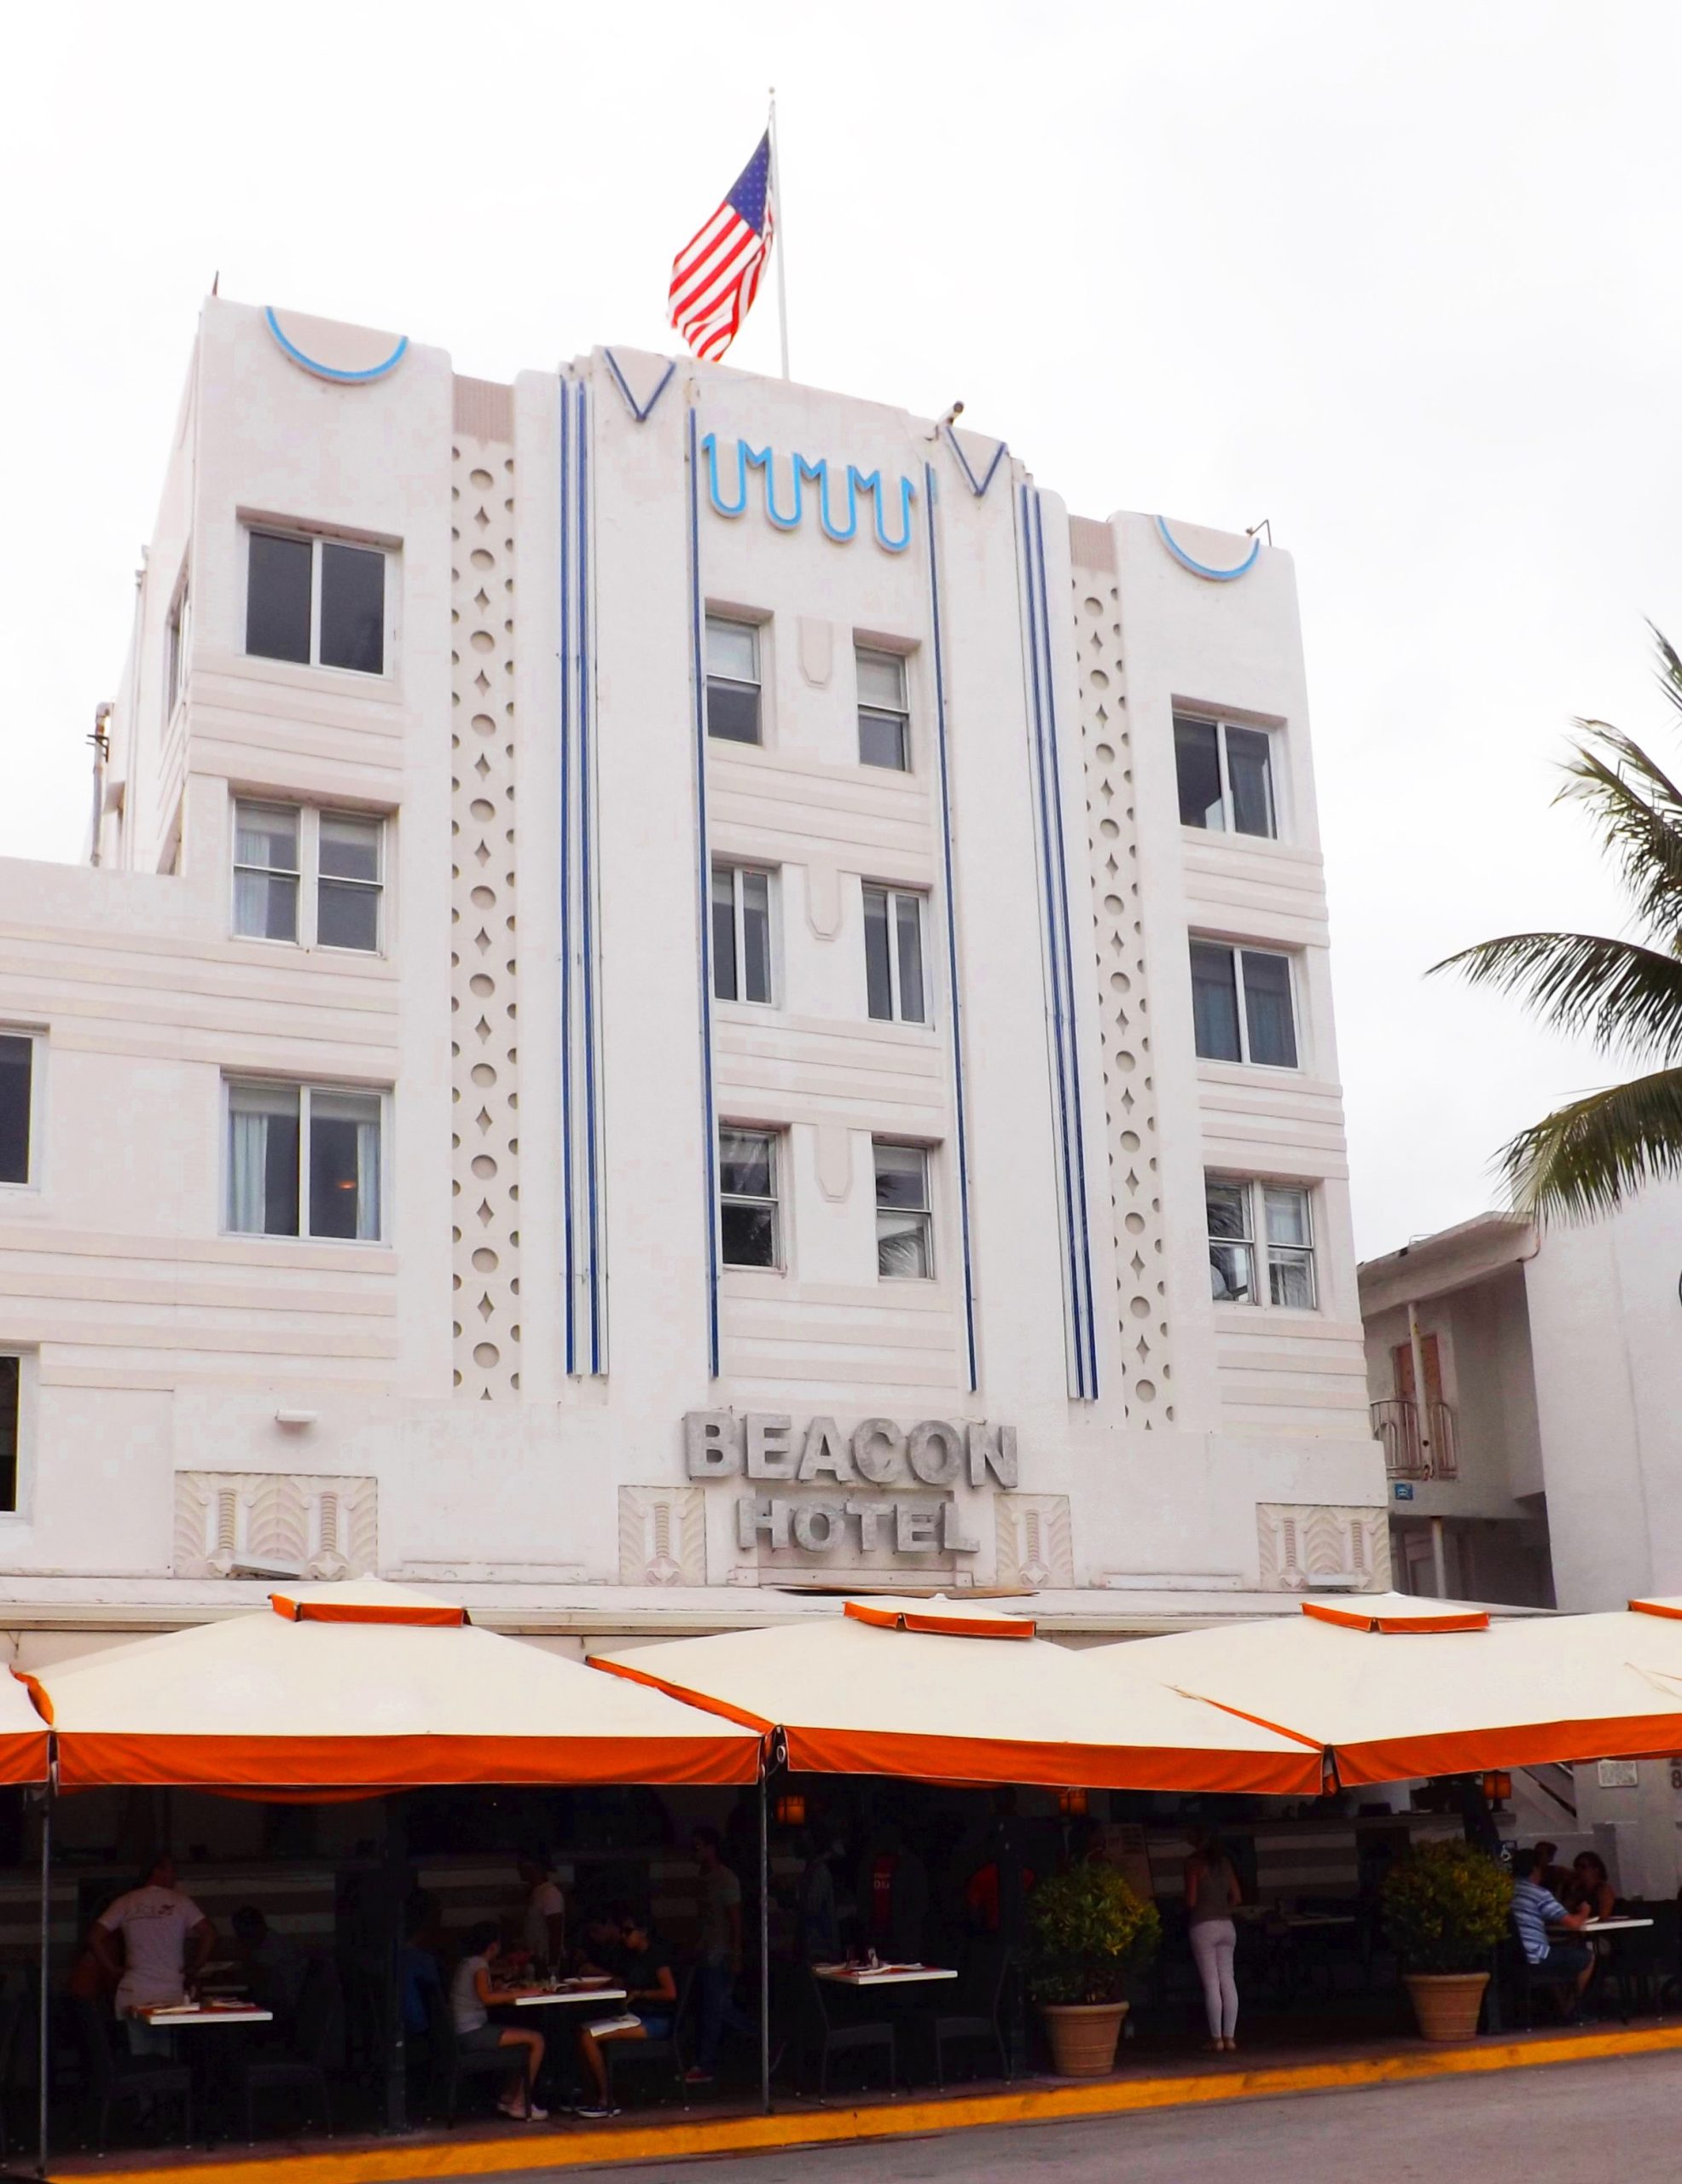 Located on Ocean Drive, the Beacon Hotel is a striking example of Art Deco architecture, with its bold colors, geometric shapes, and streamlined design. Built in 1936, it has been meticulously restored and is now a boutique hotel known for its stylish interiors and oceanfront location.]]>